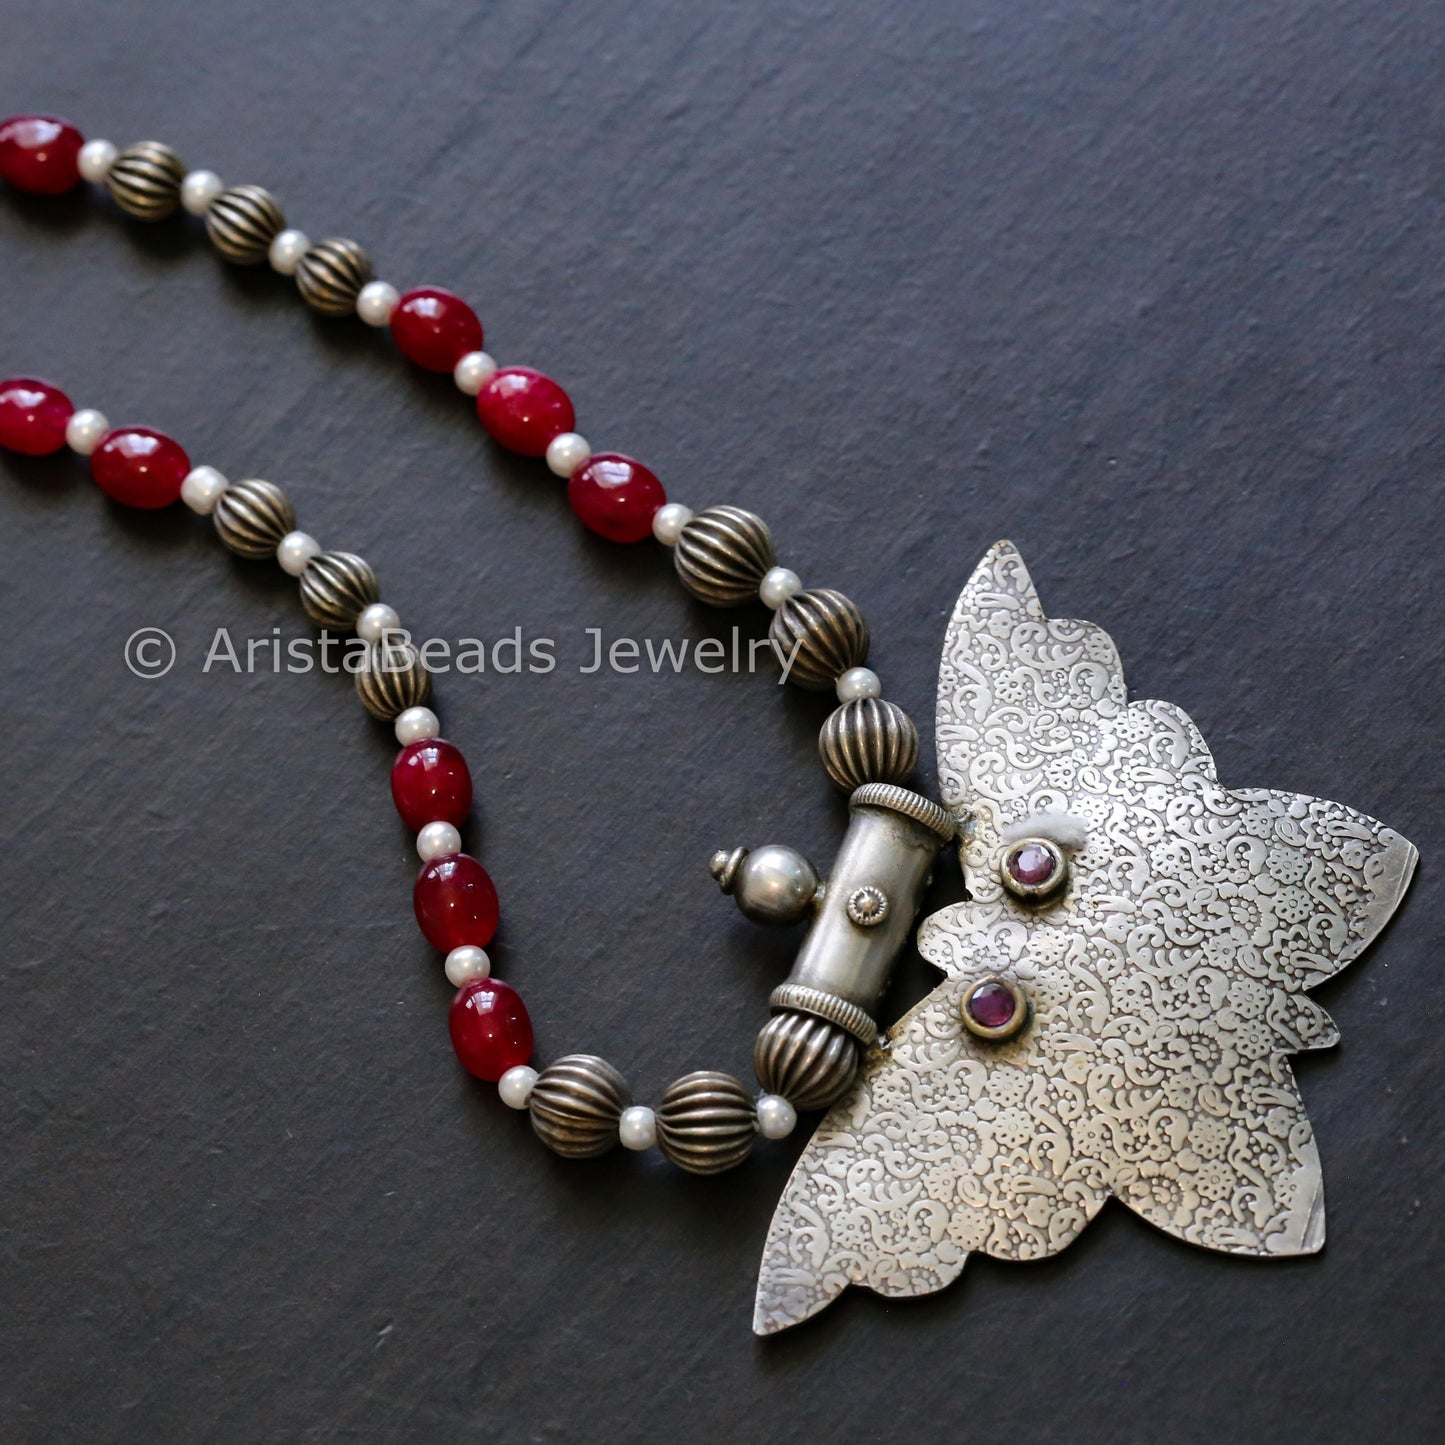 Handmade Silver Look Beaded Necklace - Style 4